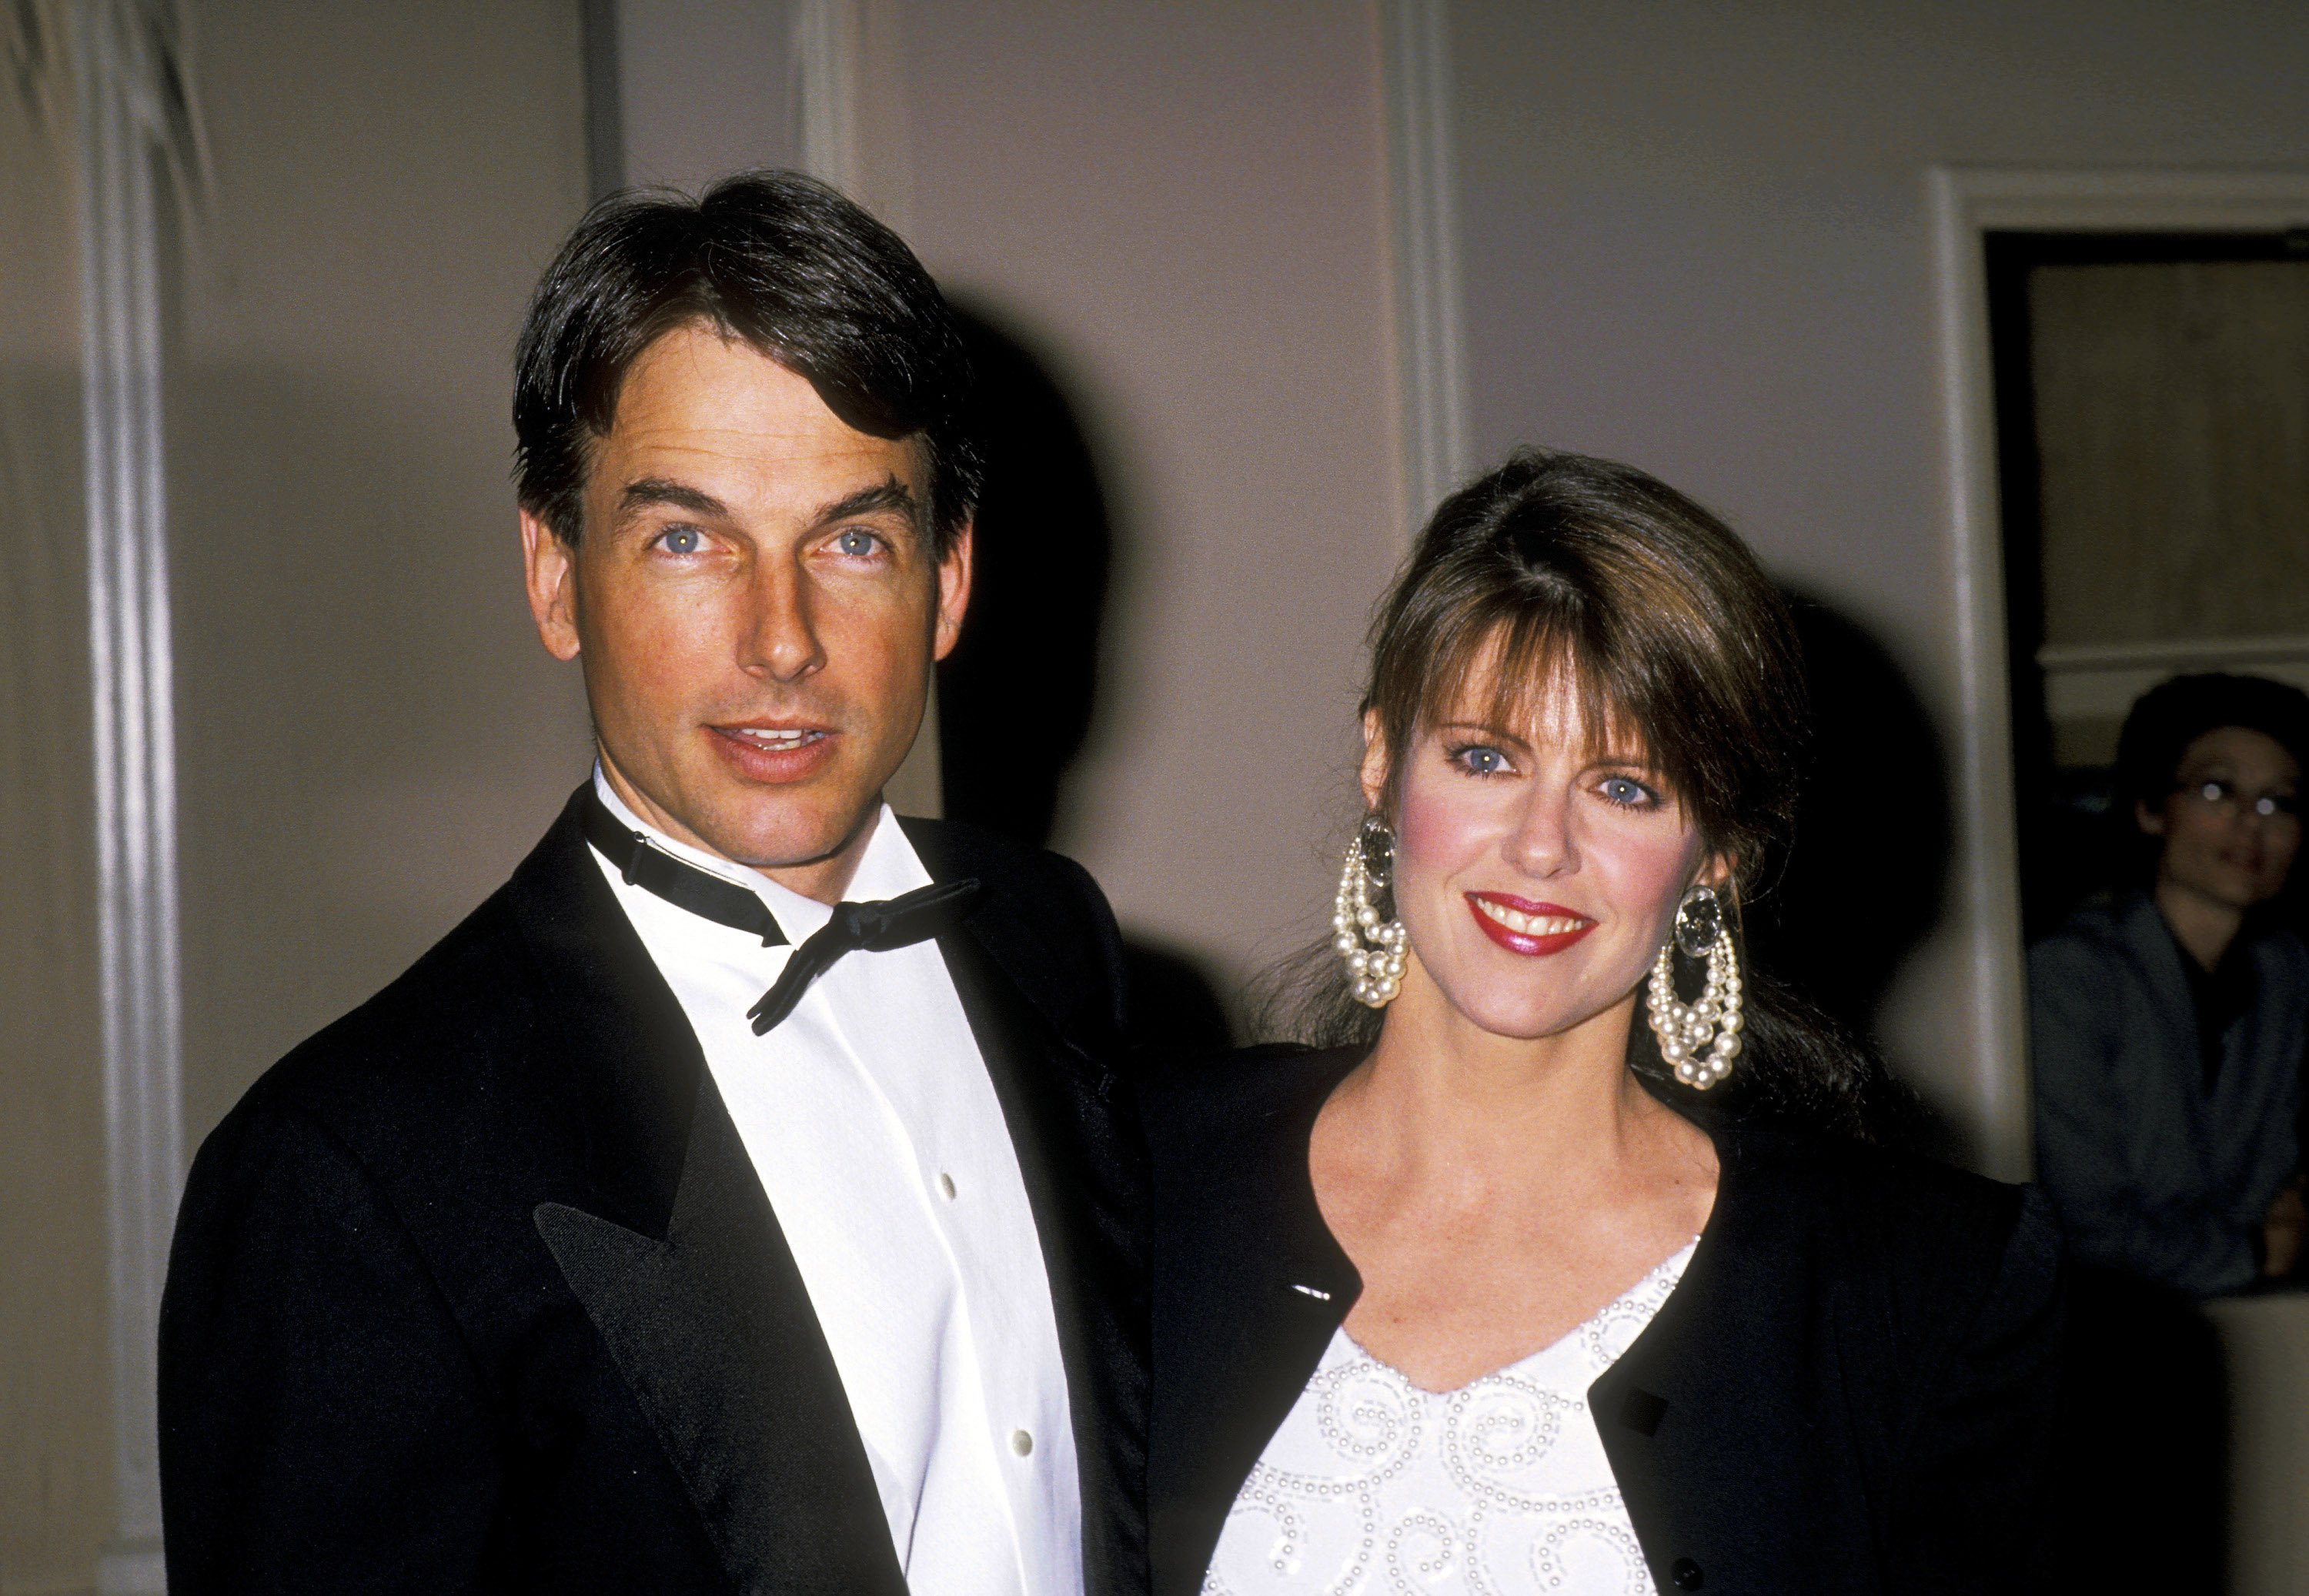 Mark Harmon and Pam Dawber | Ron Galella/Ron Galella Collection via Getty Images